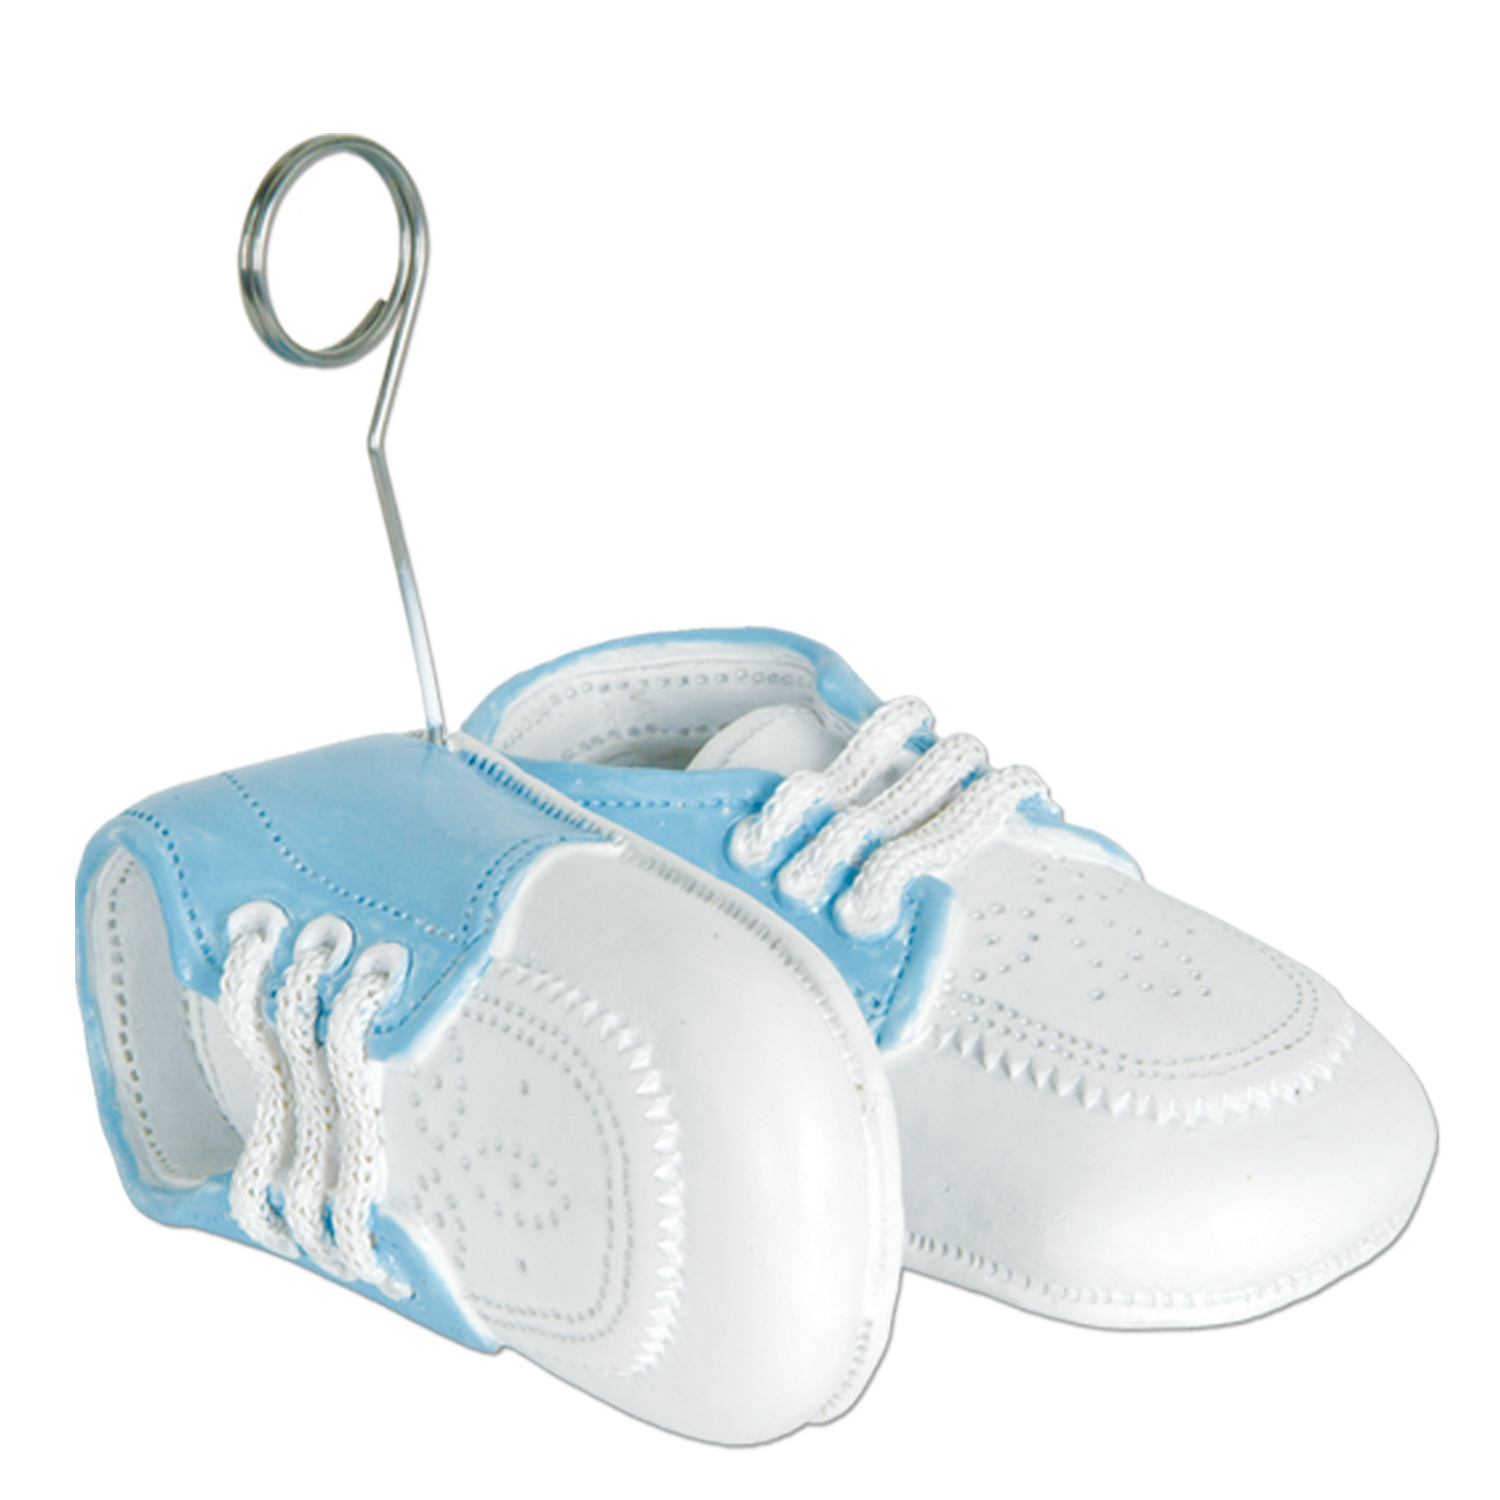 Baby SHOES Photo/Balloon Holder